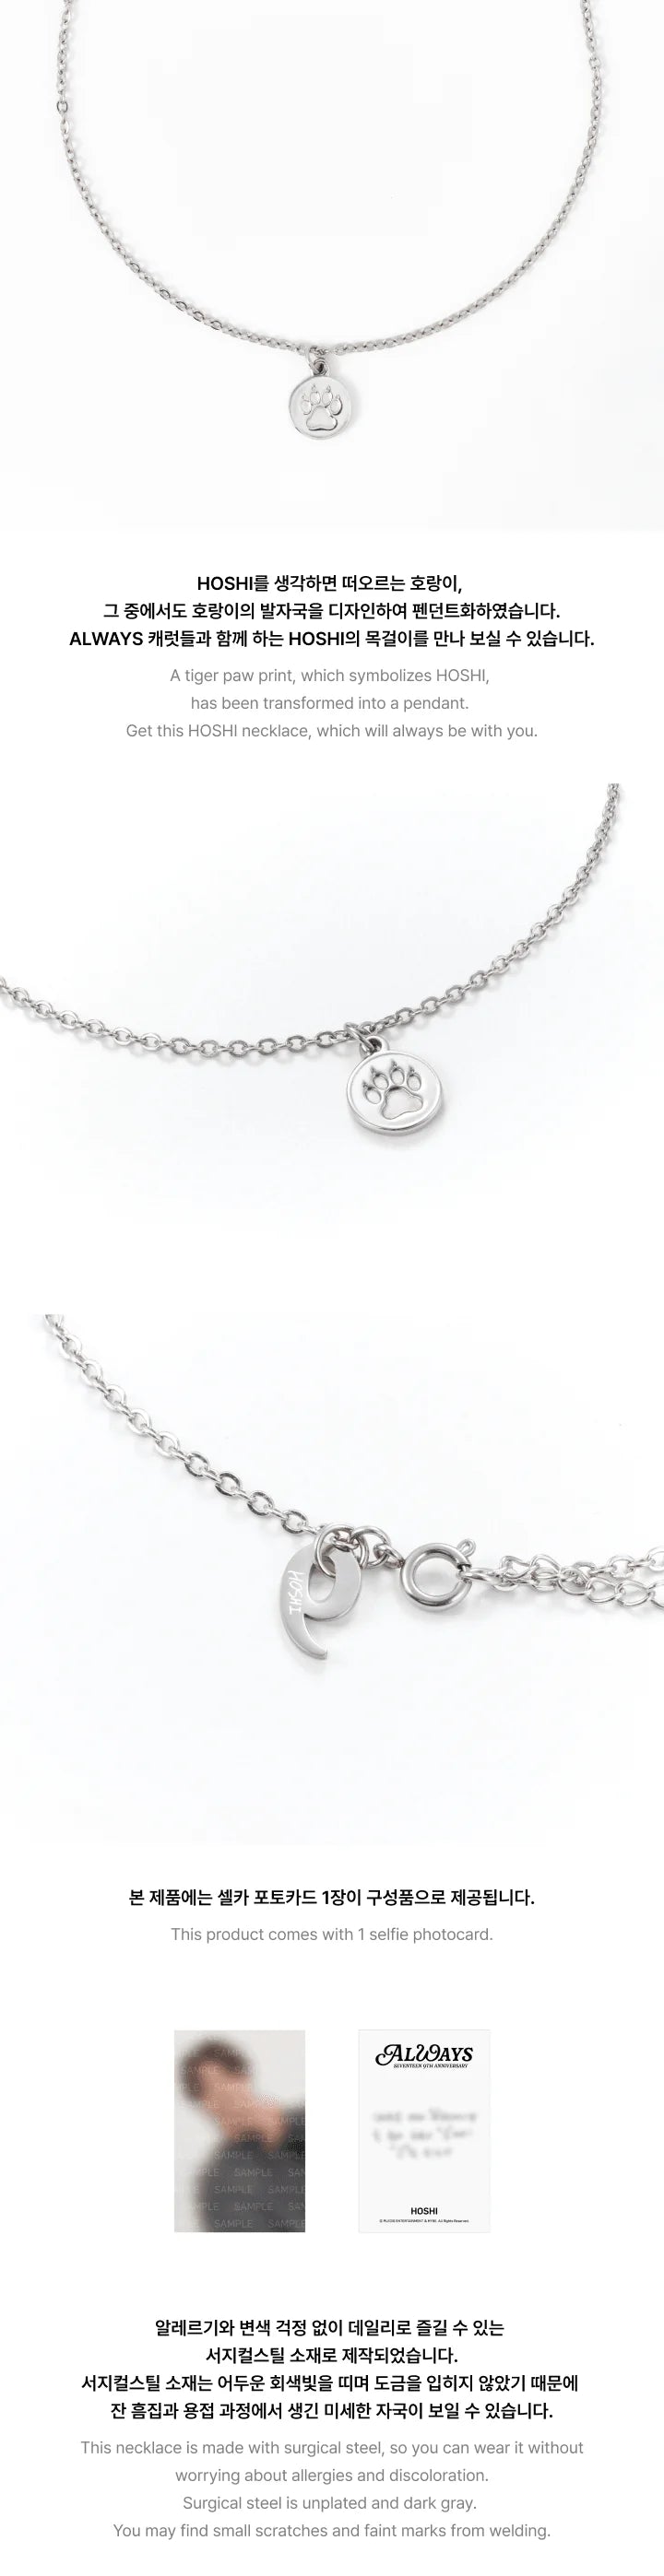 [PRE ORDER] SEVENTEEN - 9TH ANNIVERSARY (Official MD) / NECKLACE : HOSHI